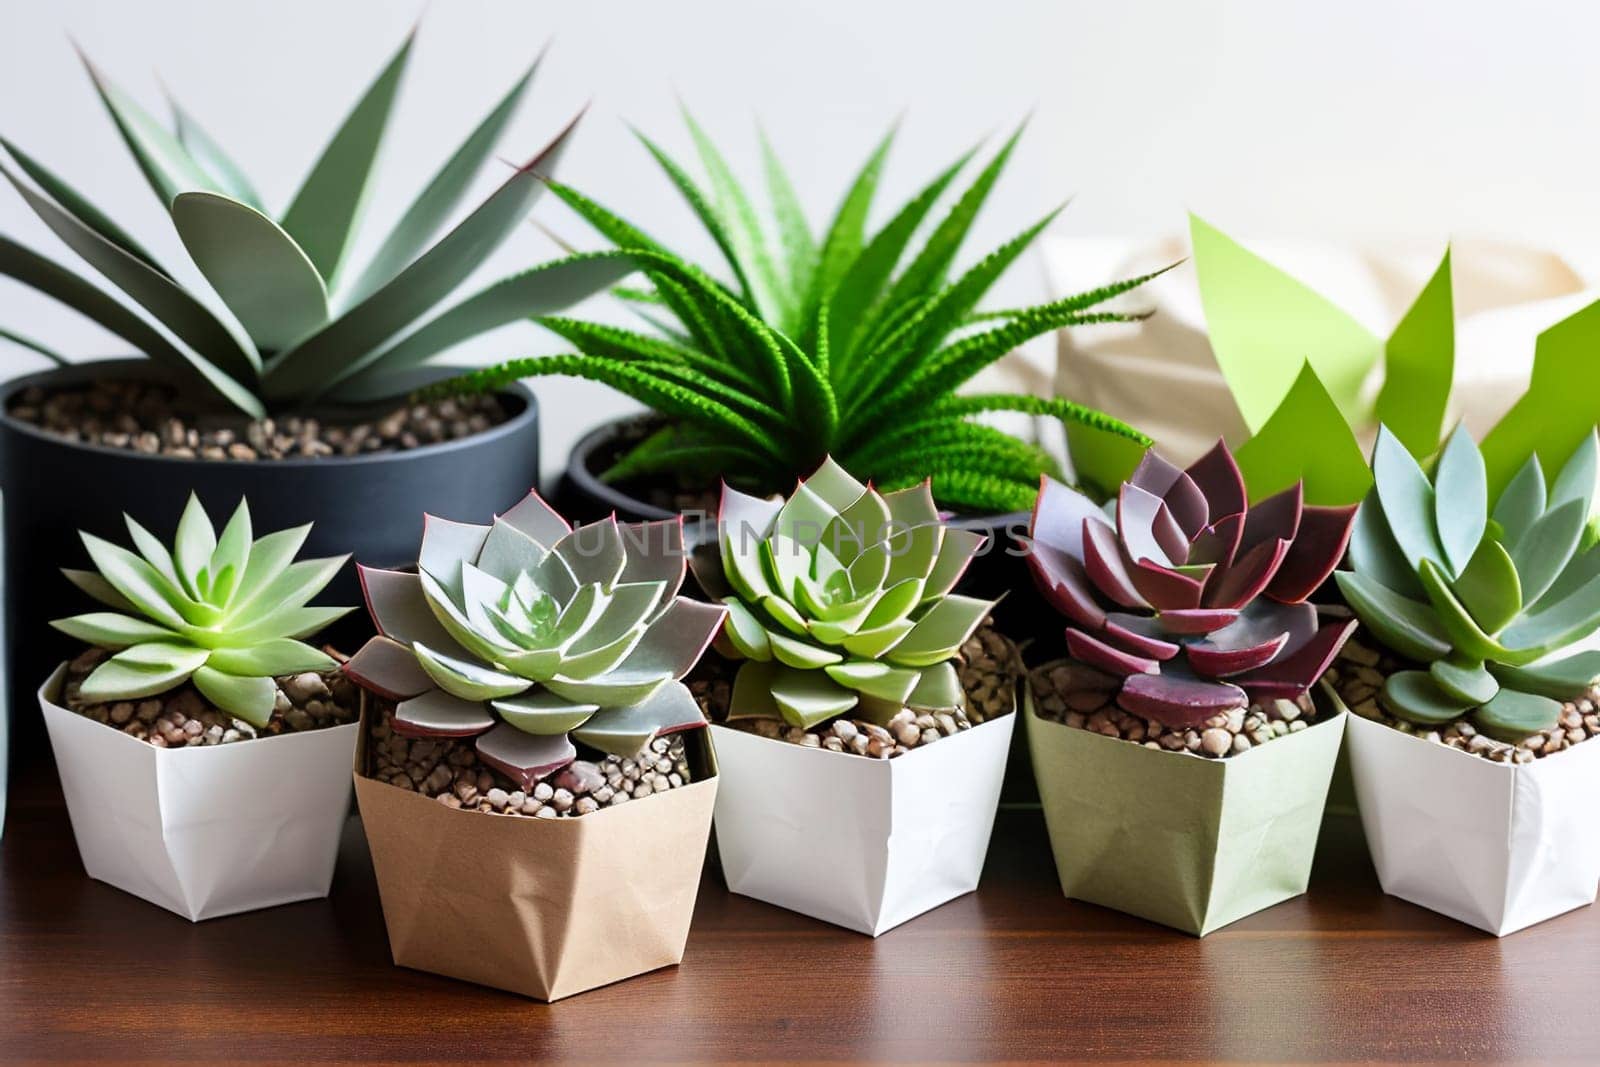 A large set of succulents in an eco-paper bag. Eco-friendly reusable eco-bag and succulents. Shop of indoor plants